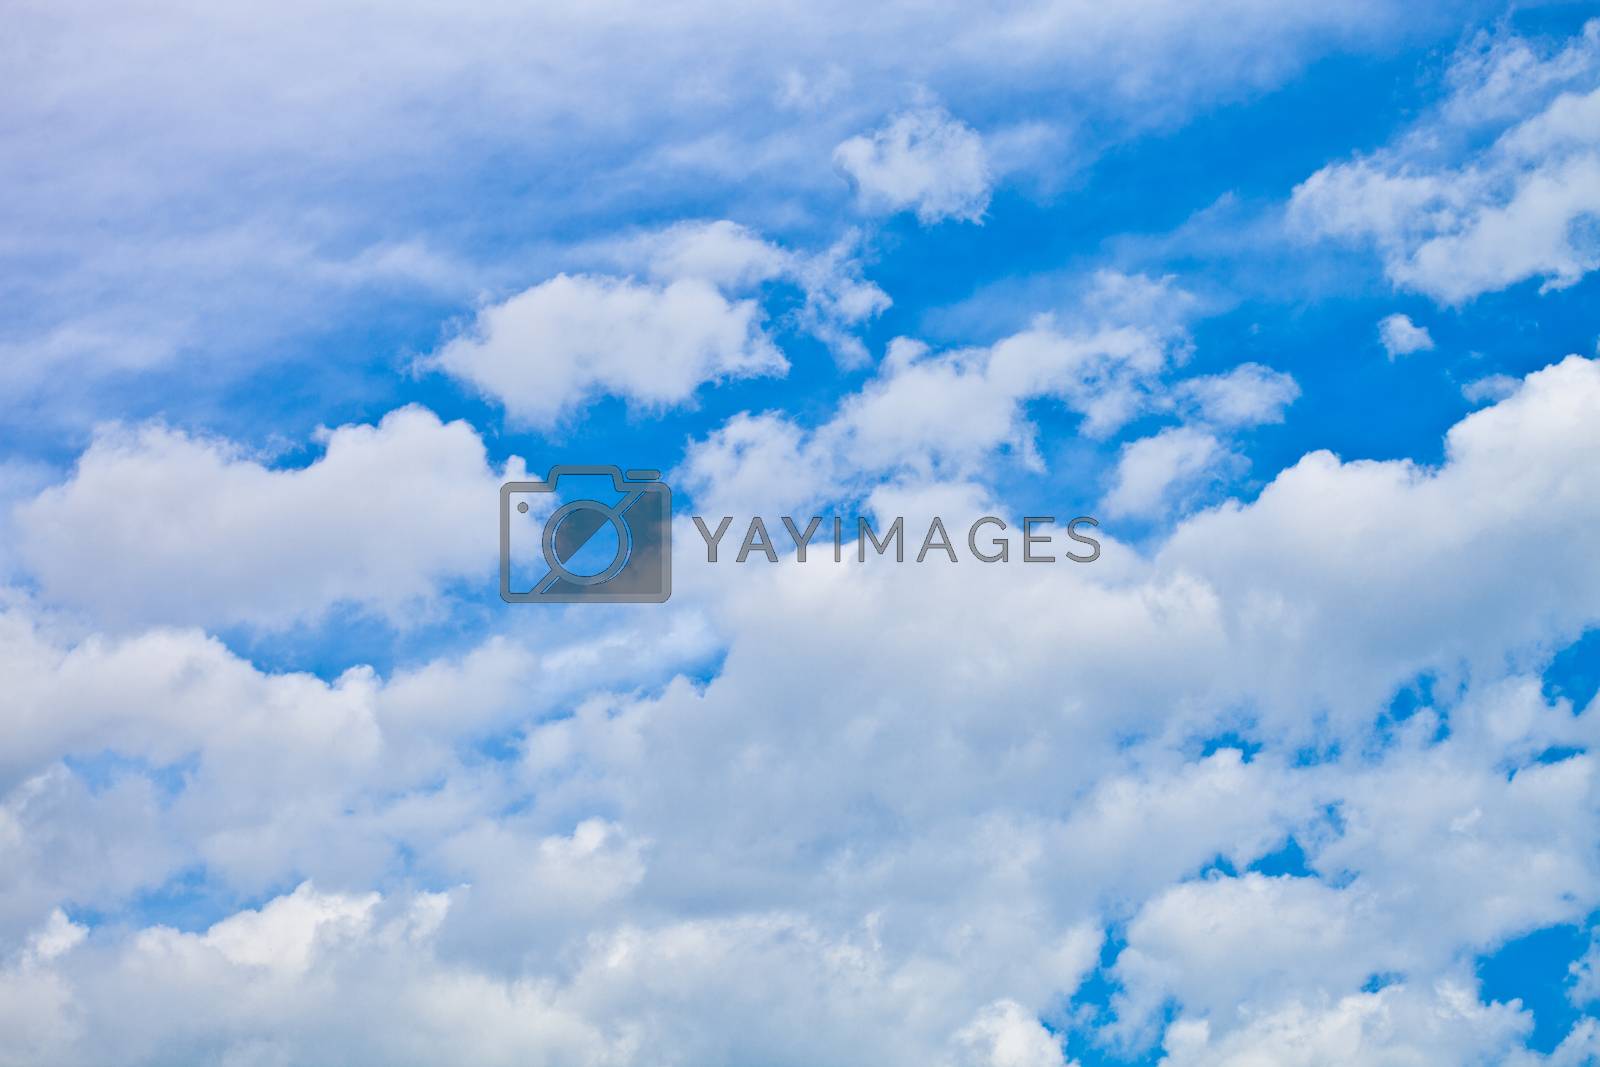 Royalty free image of blue sky with clouds by marylooo